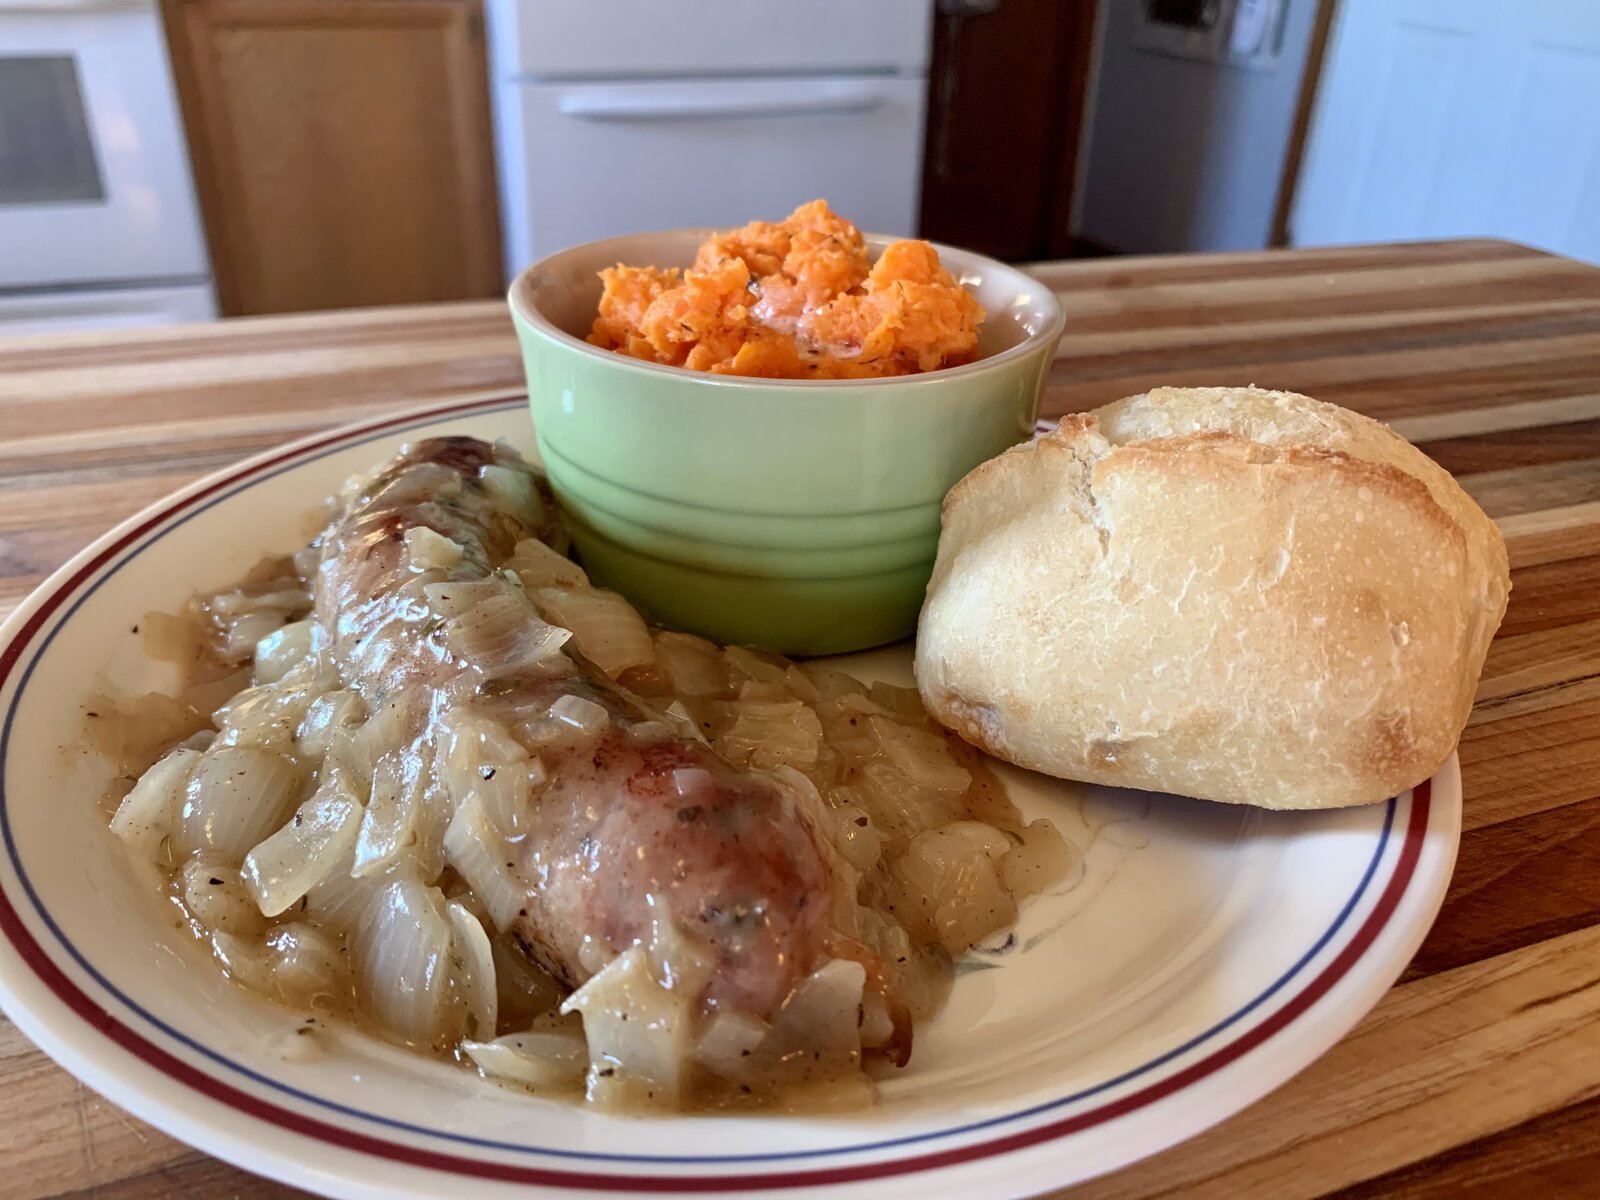 Sausage In Wine W/ Mashed Carrot & Crusty Roll